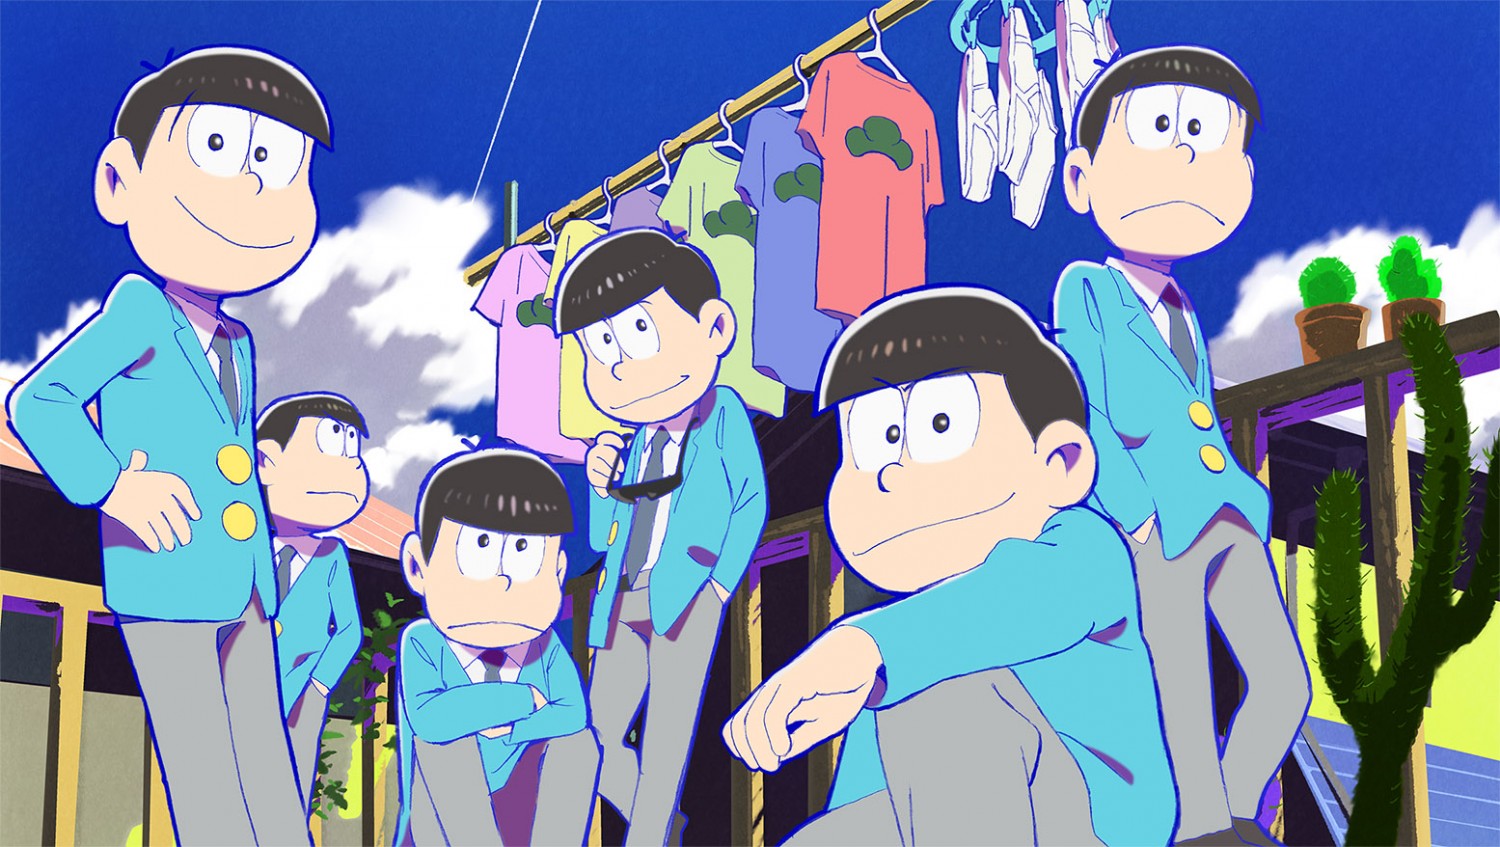 Article] Japanese Girls Are Crazy About The Sextuplets! What Makes The Anime  “Osomatsu-san” So Irresistible? | Japanese kawaii idol music culture news |  Tokyo Girls Update